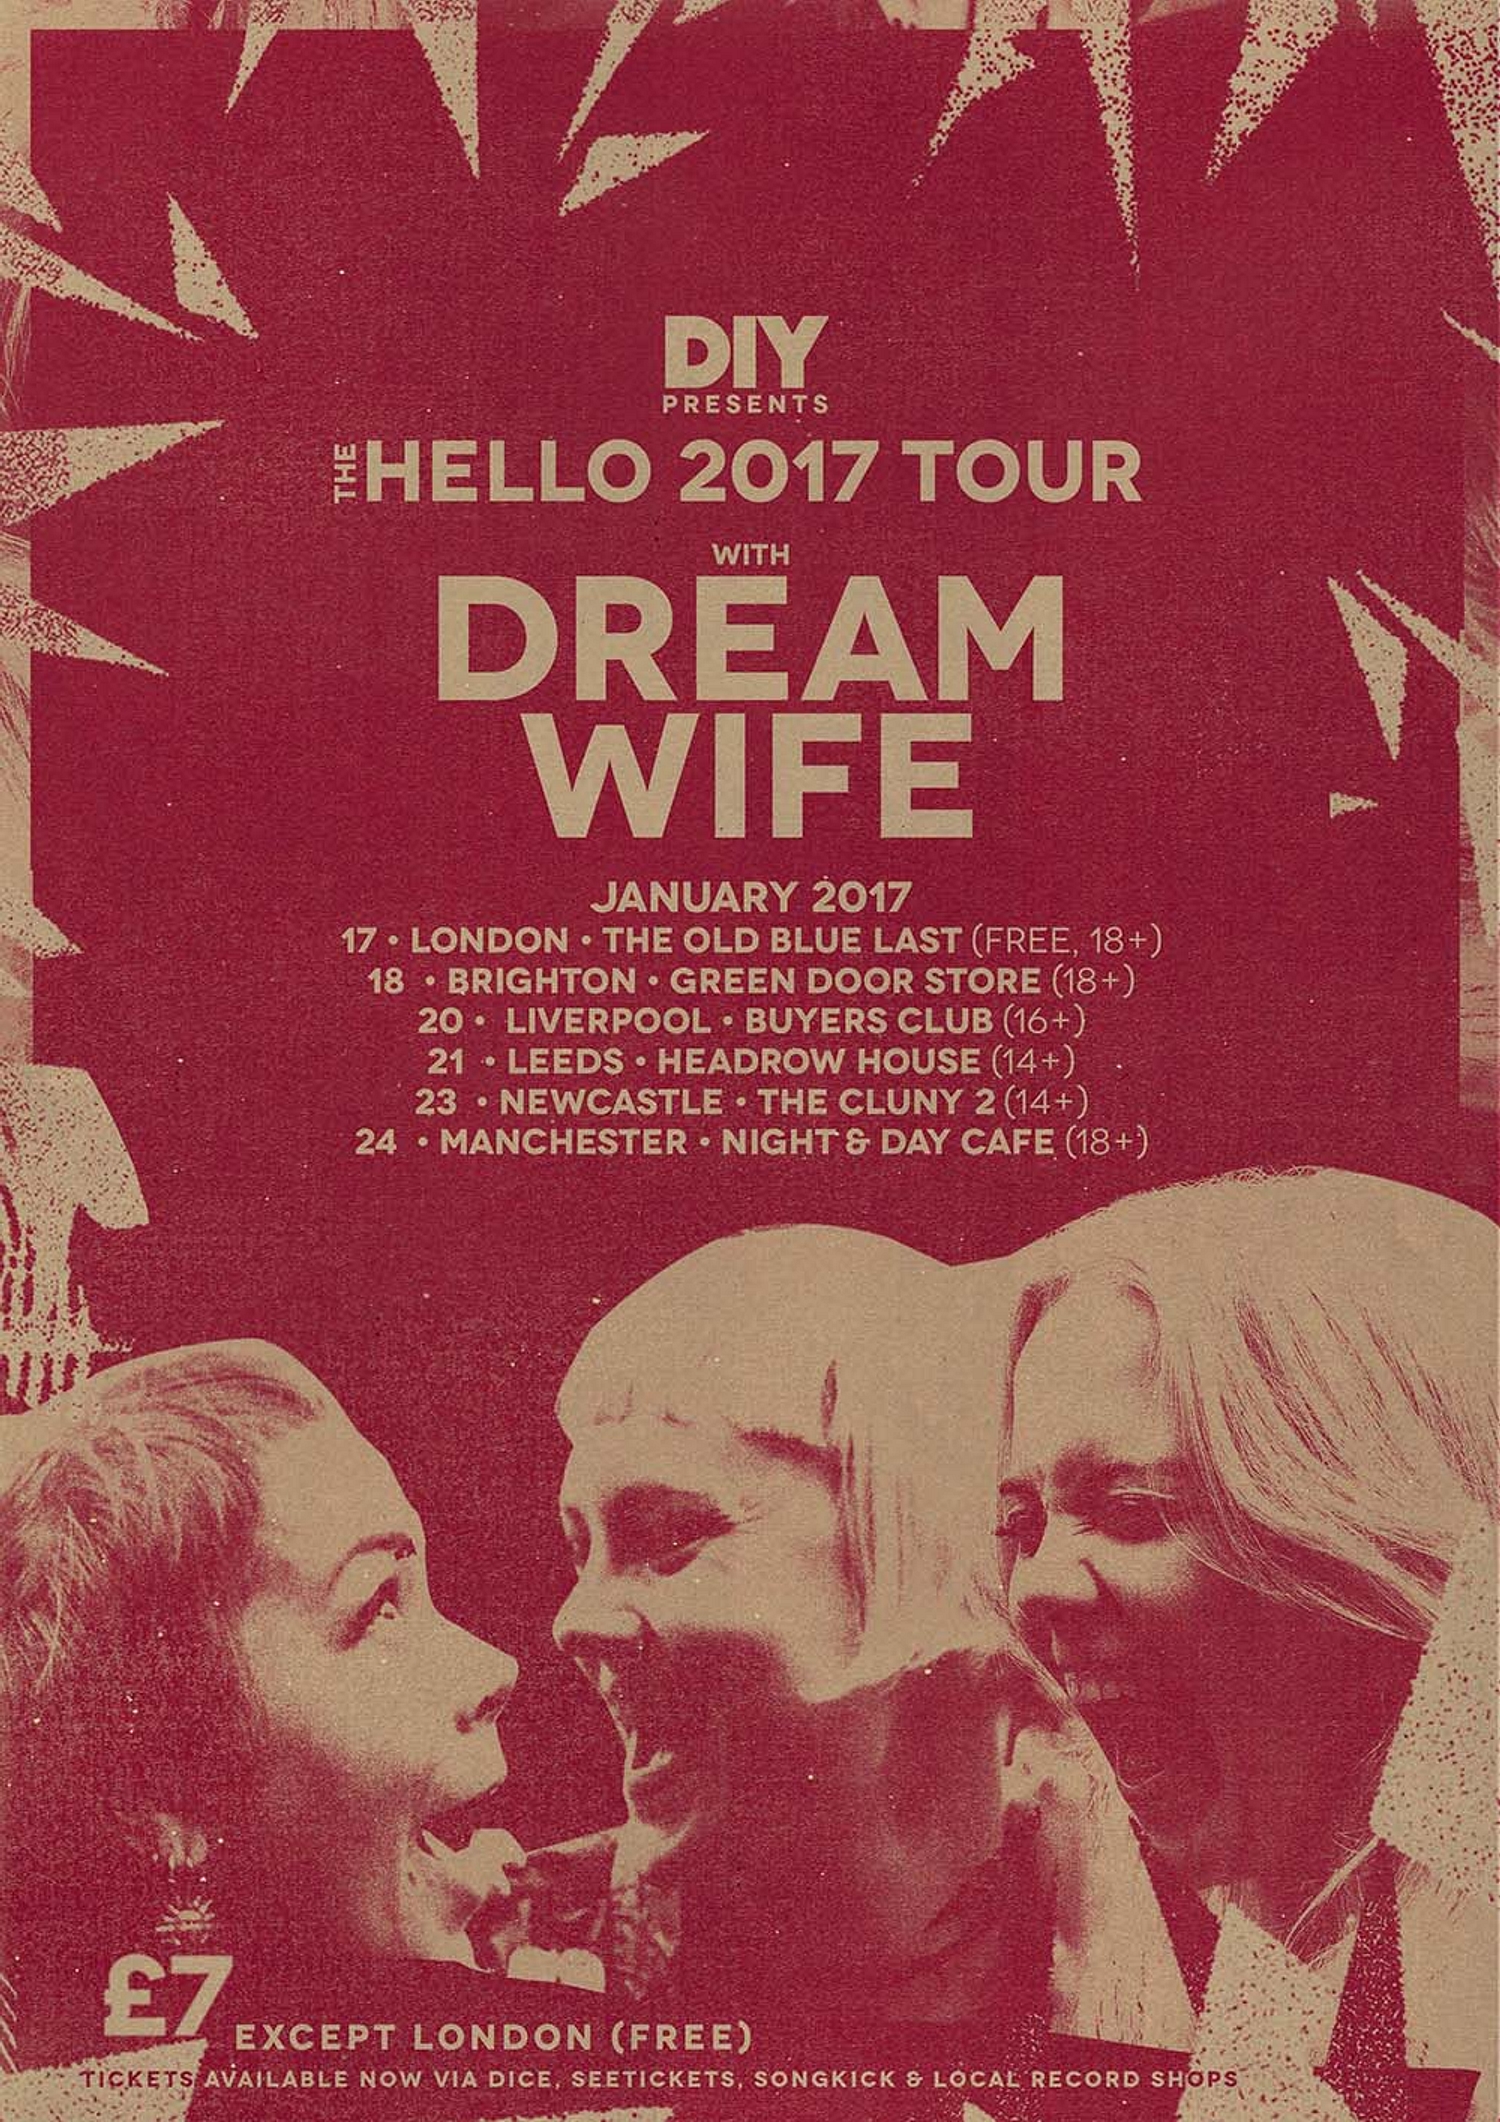 Dream Wife’s Hello 2017 tour tickets are on sale now!